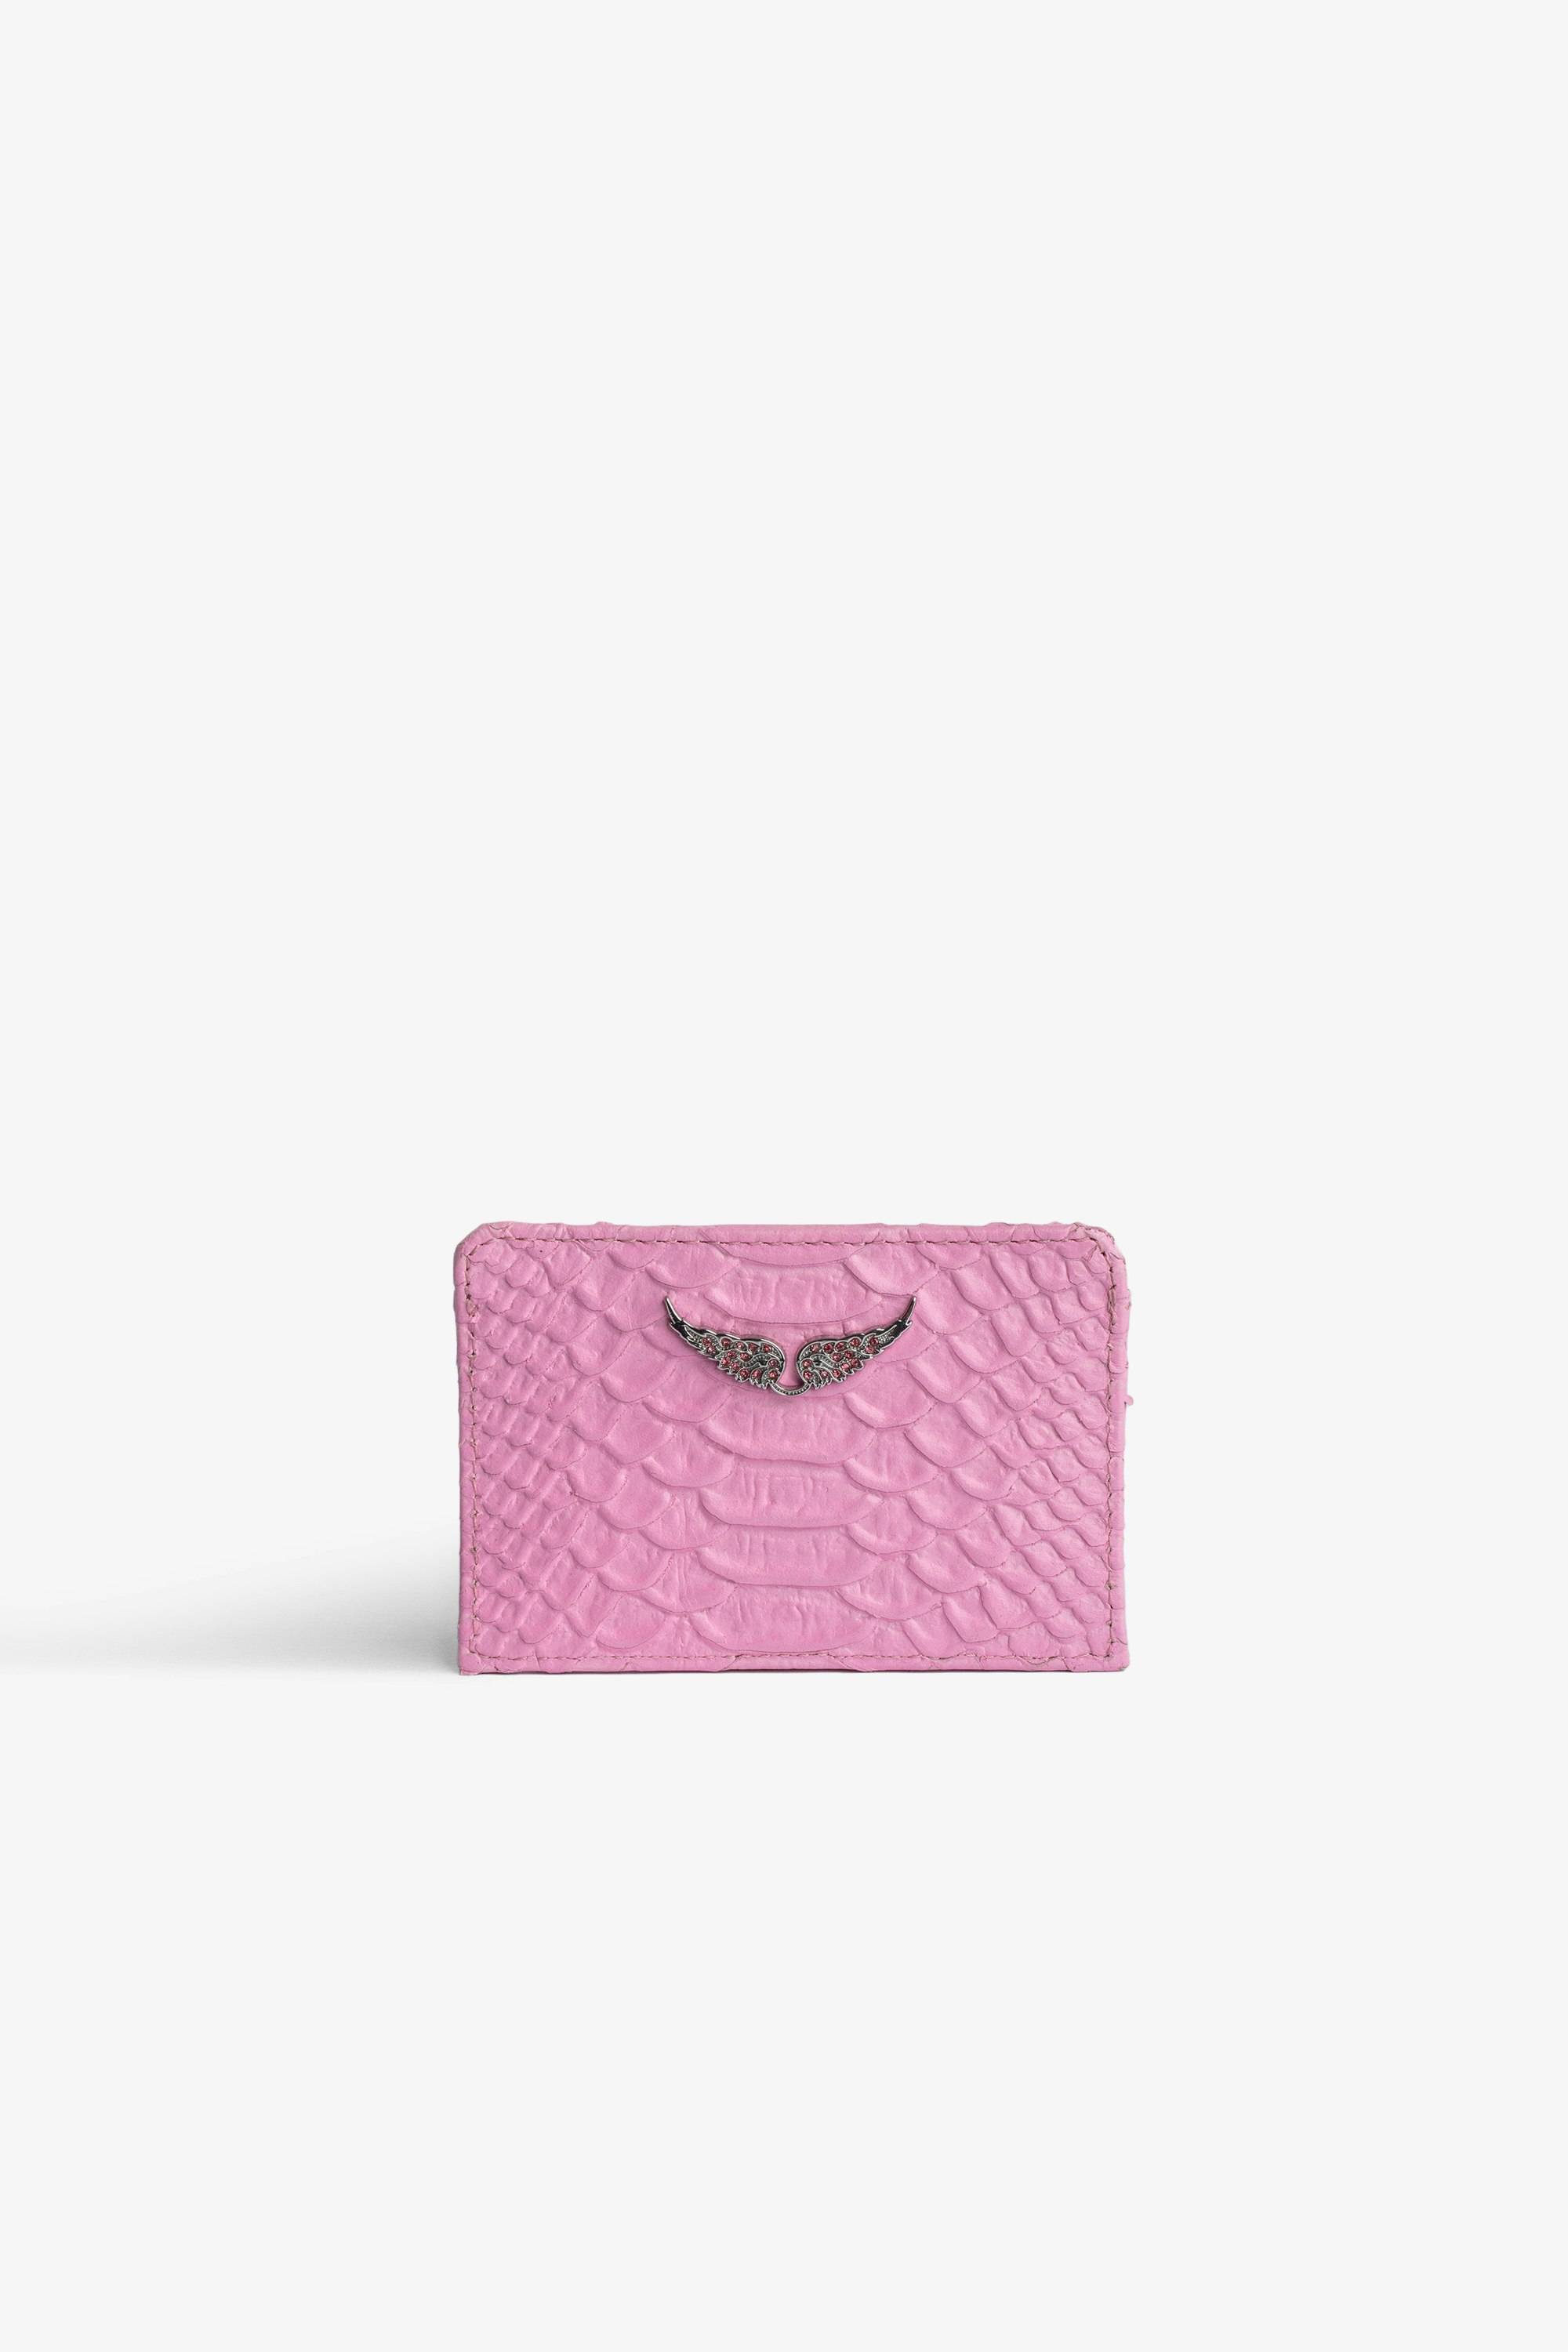 ZV Pass Savage 財布 Women’s card holder in pink snakeskin-effect leather